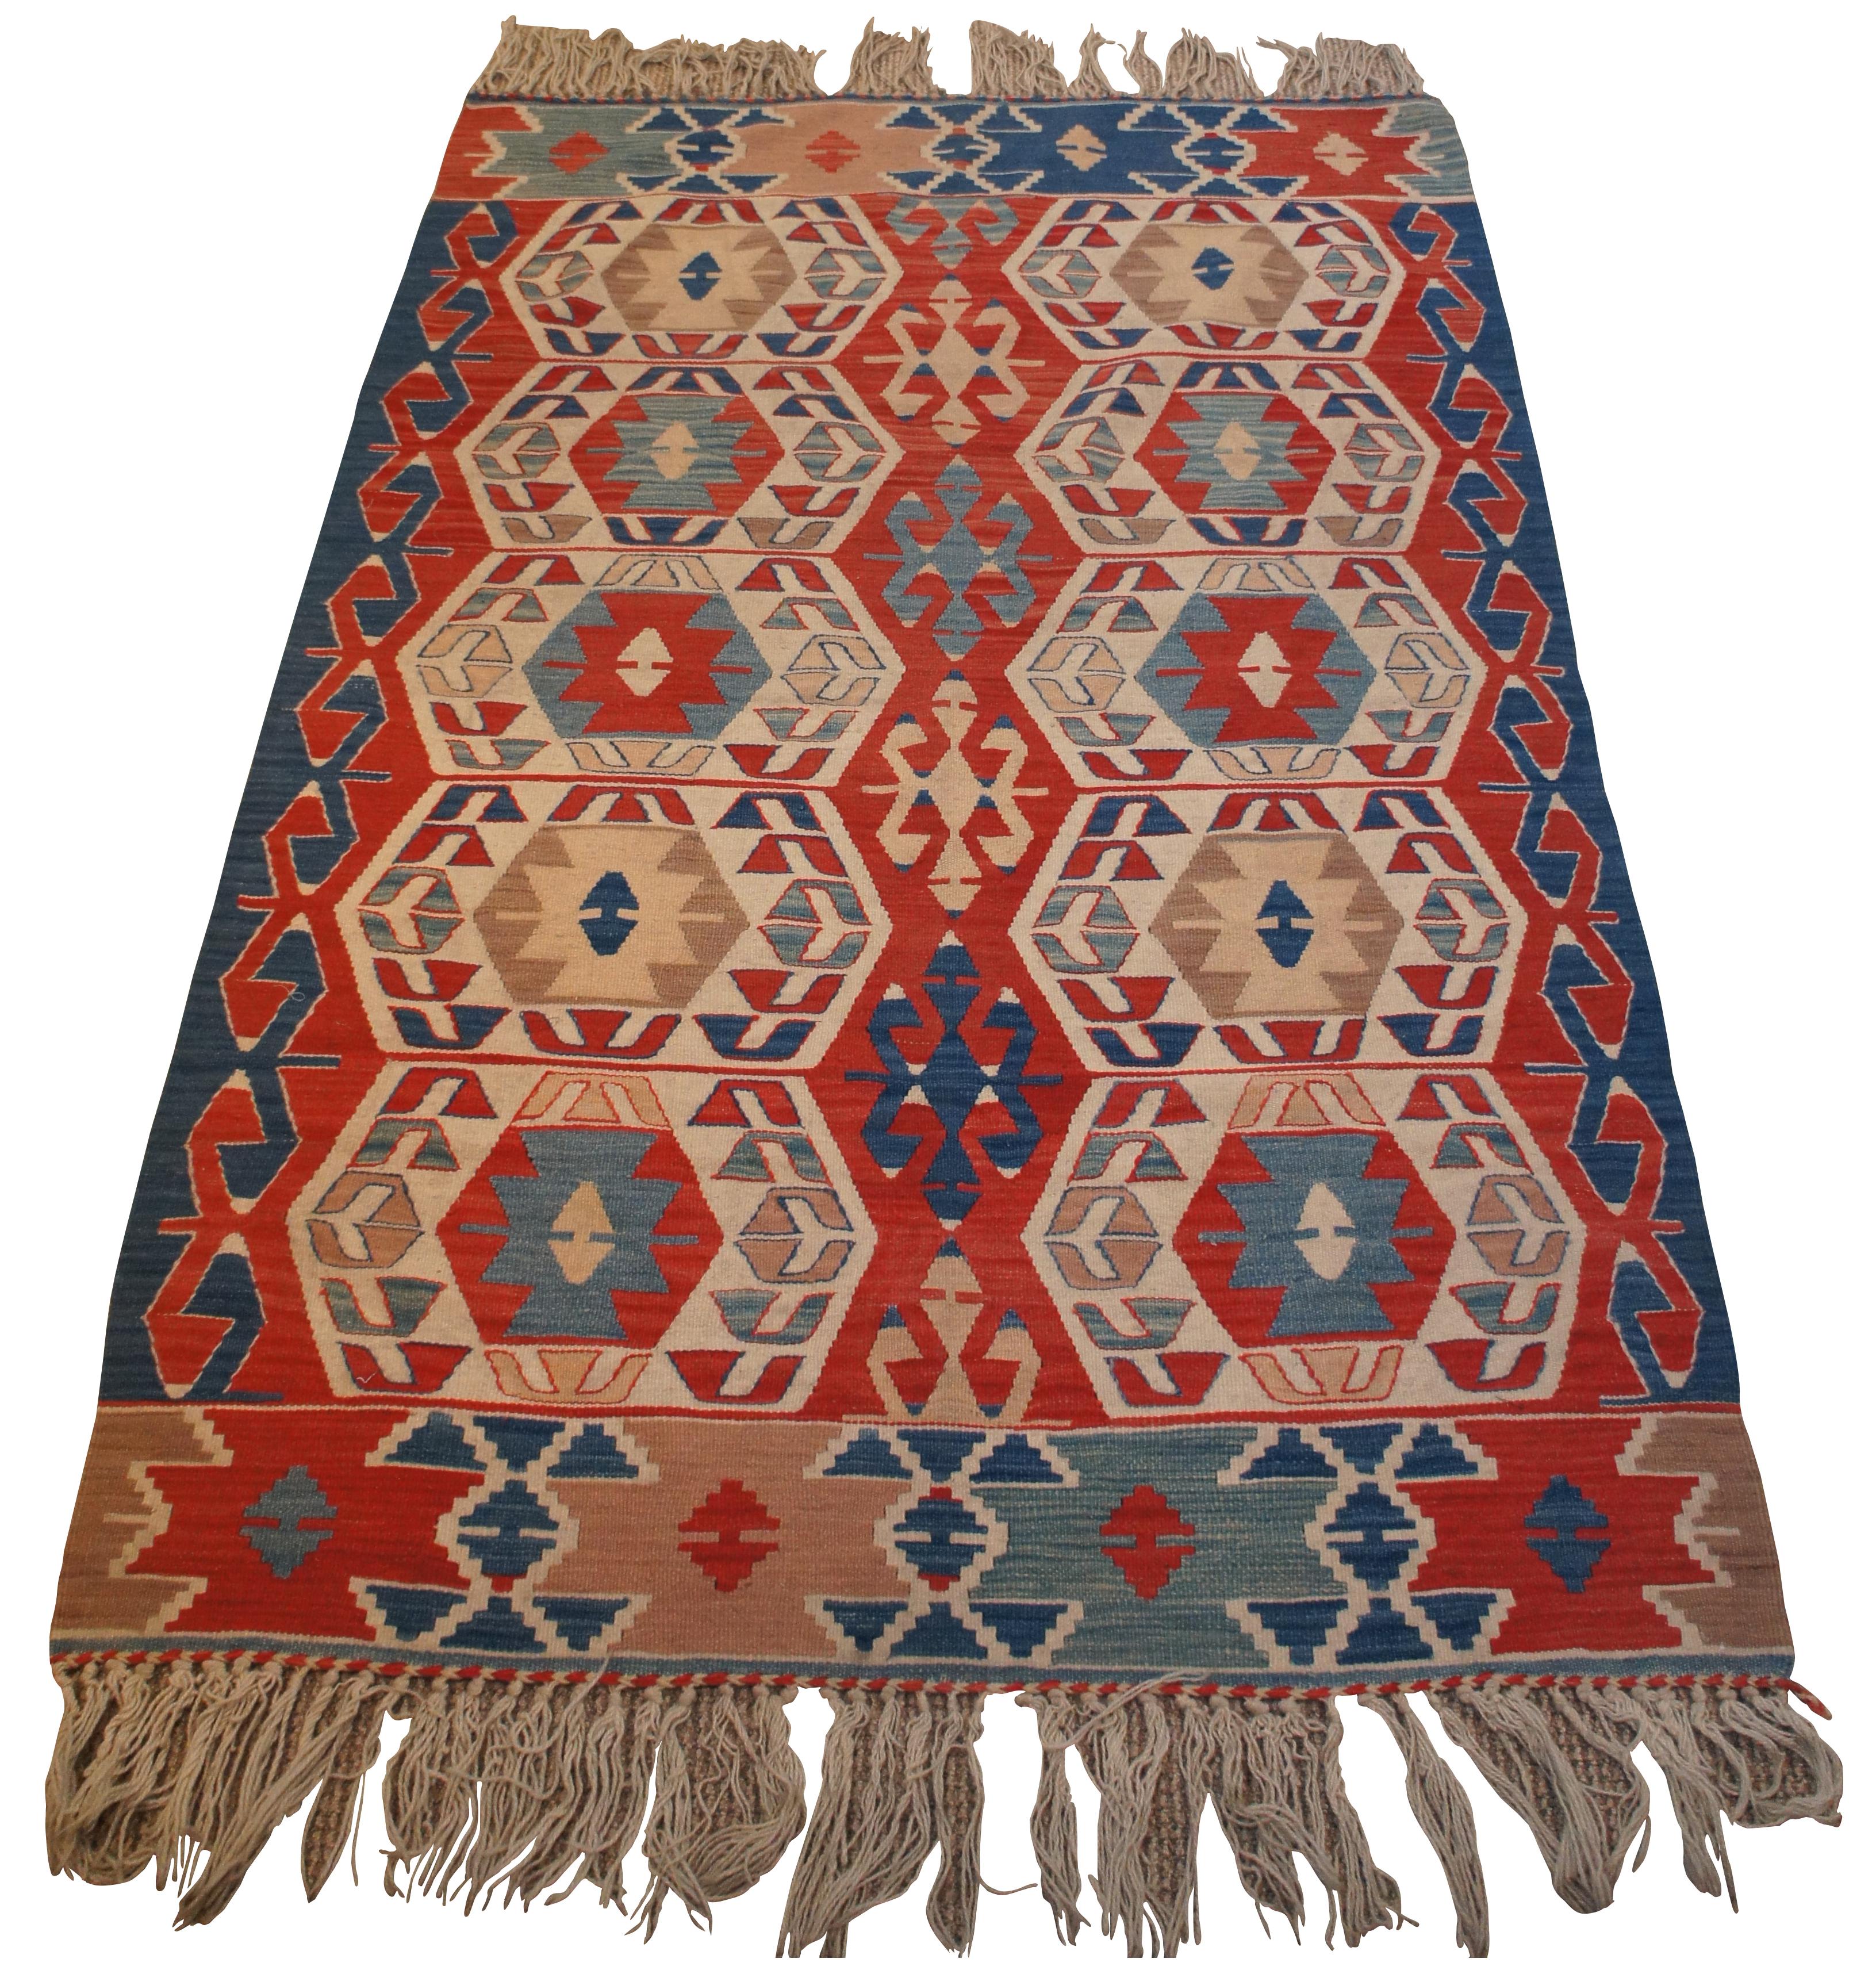 Vintage Southwestern Turkish Red & Blue Wool Flat Weave Kilim Rug Carpet In Good Condition For Sale In Dayton, OH